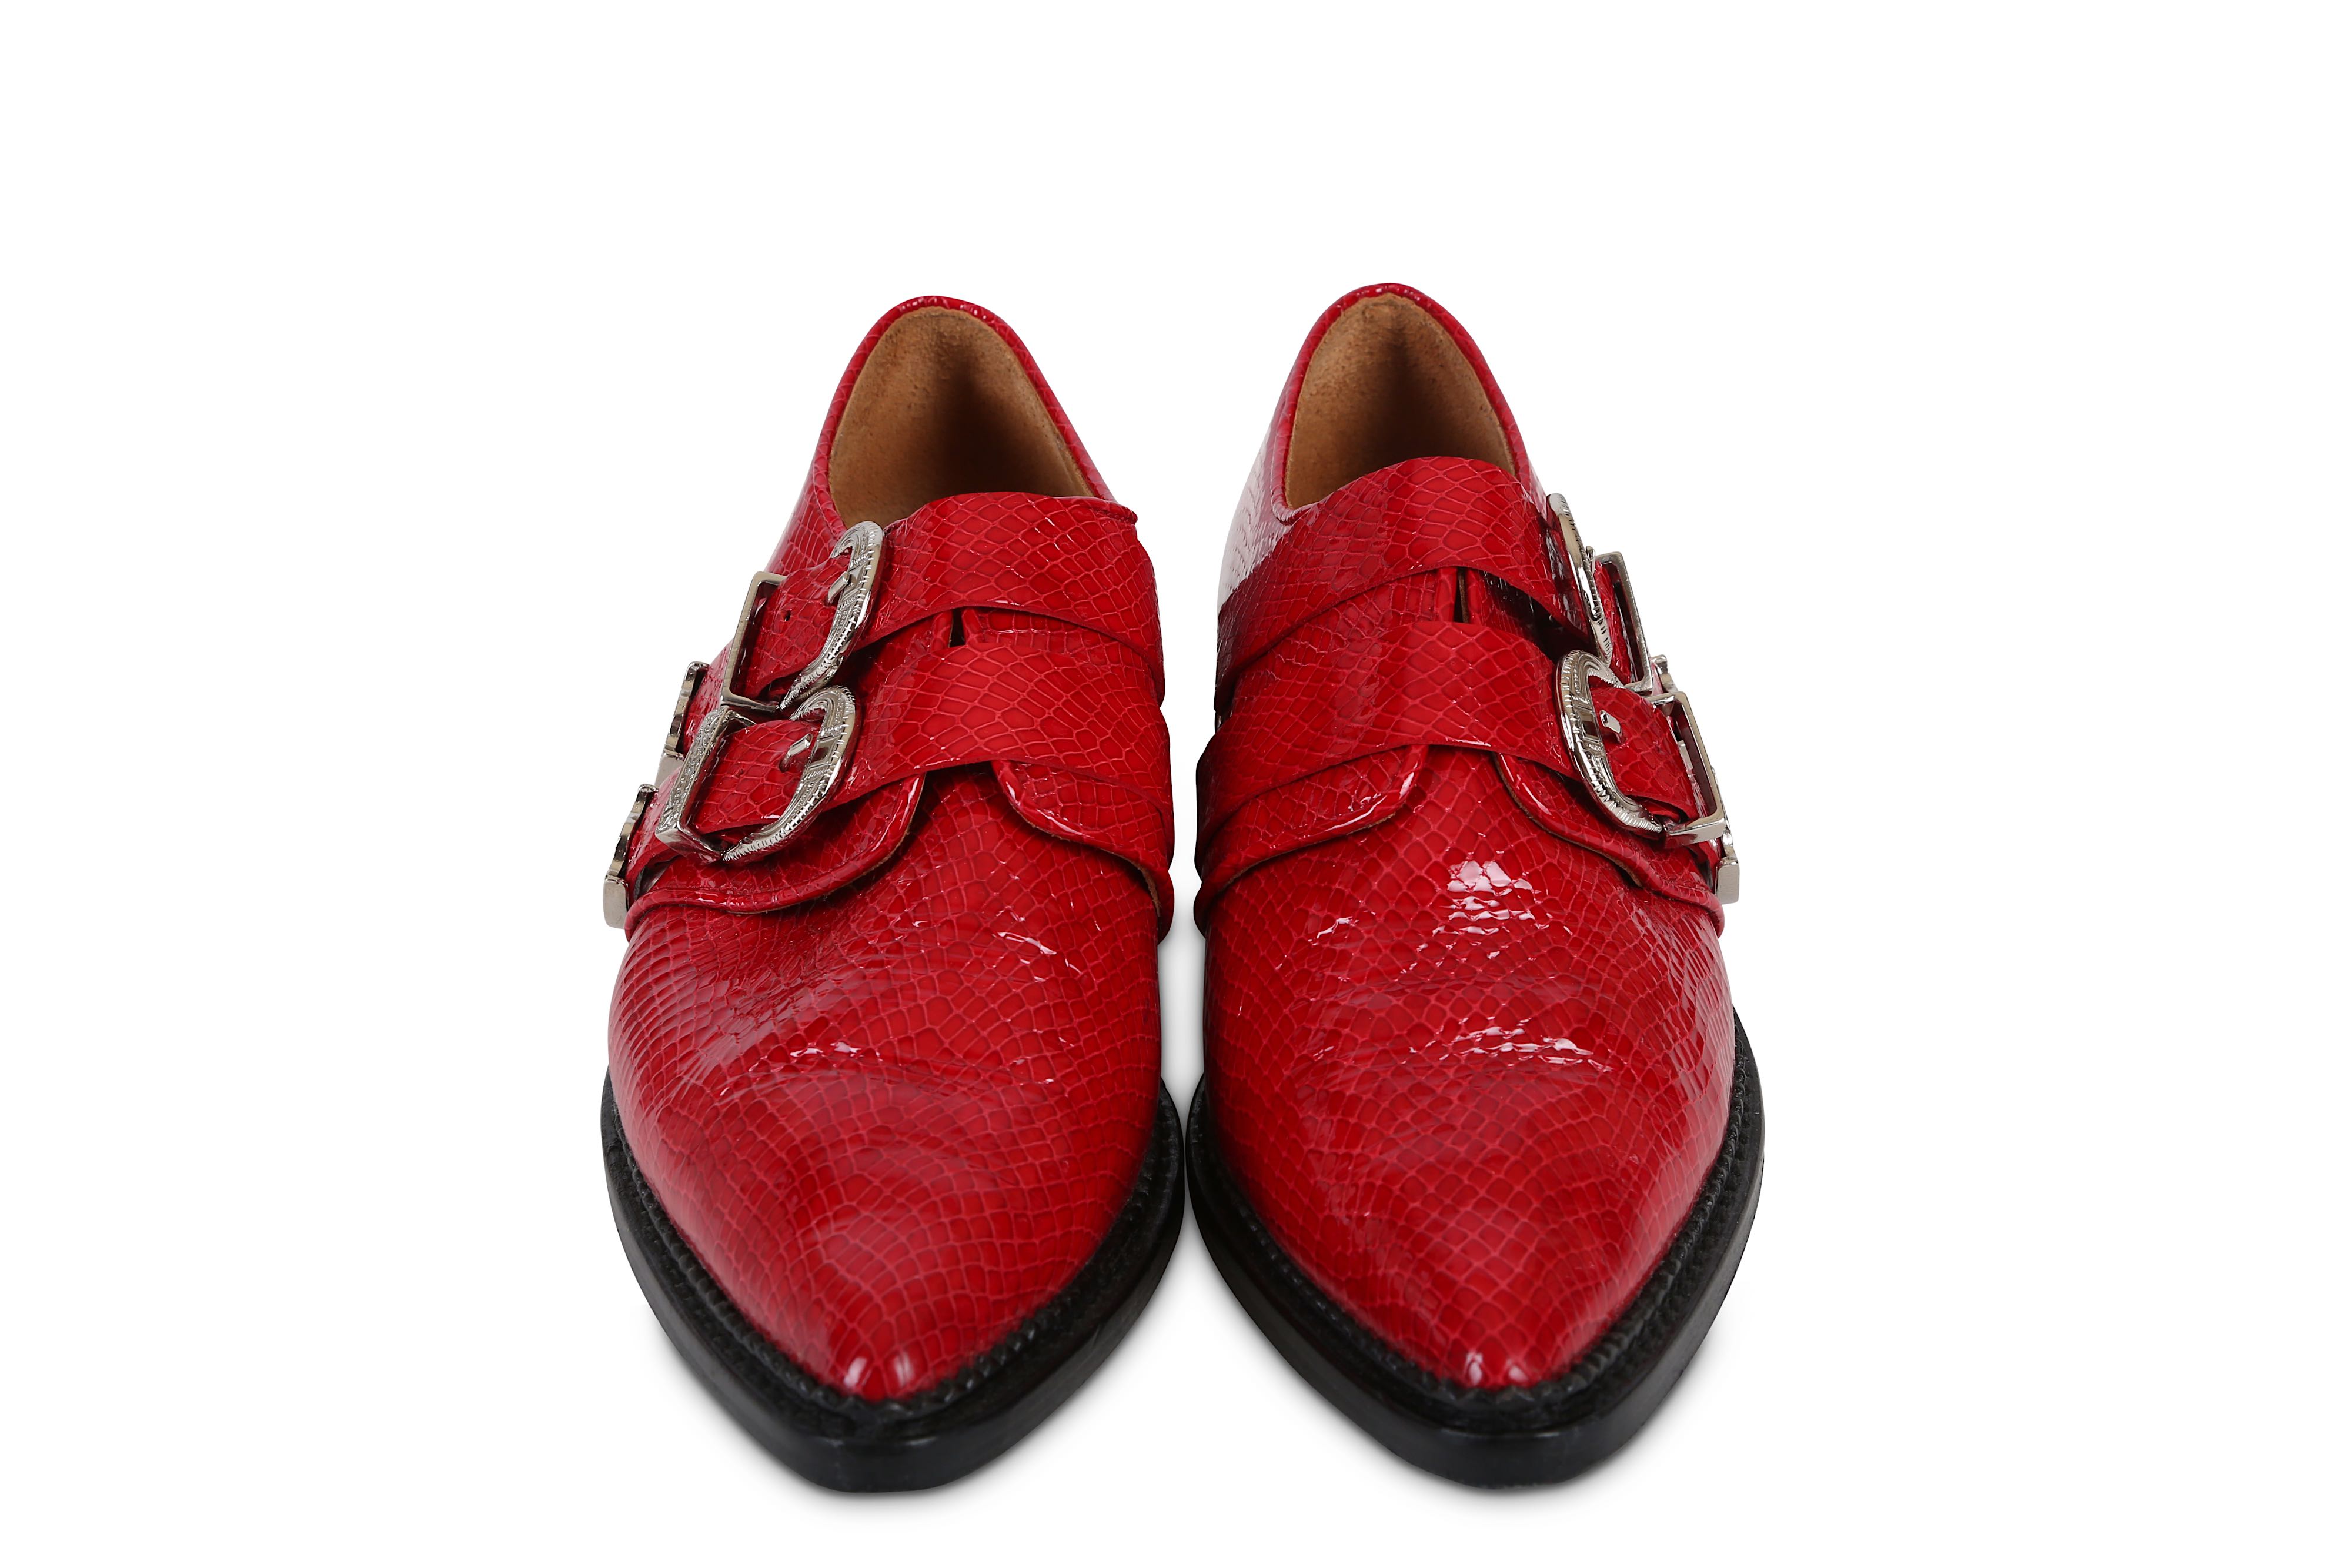 Lot 65 - Toga Pulla Red Western Oxford Flats,